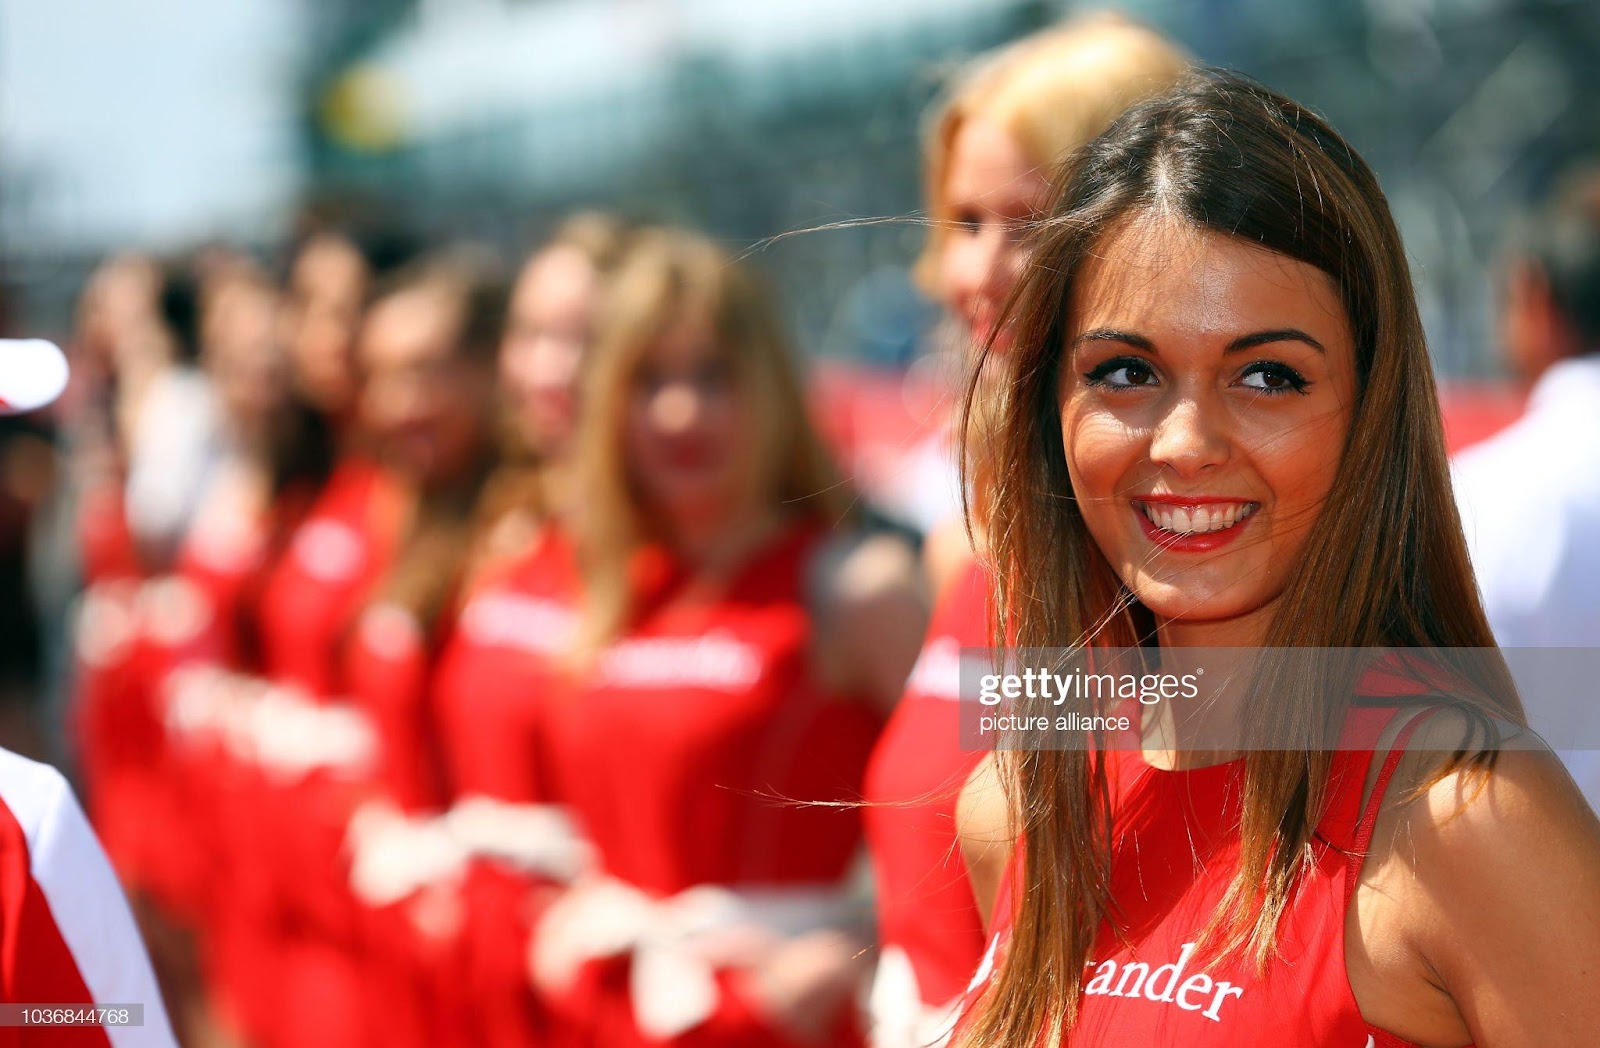 D:\Documenti\posts\posts\Women and motorsport\foto\Getty e altre\grid-girls-seen-during-the-drivers-parade-before-the-start-of-the-picture-id1036844768.jpg